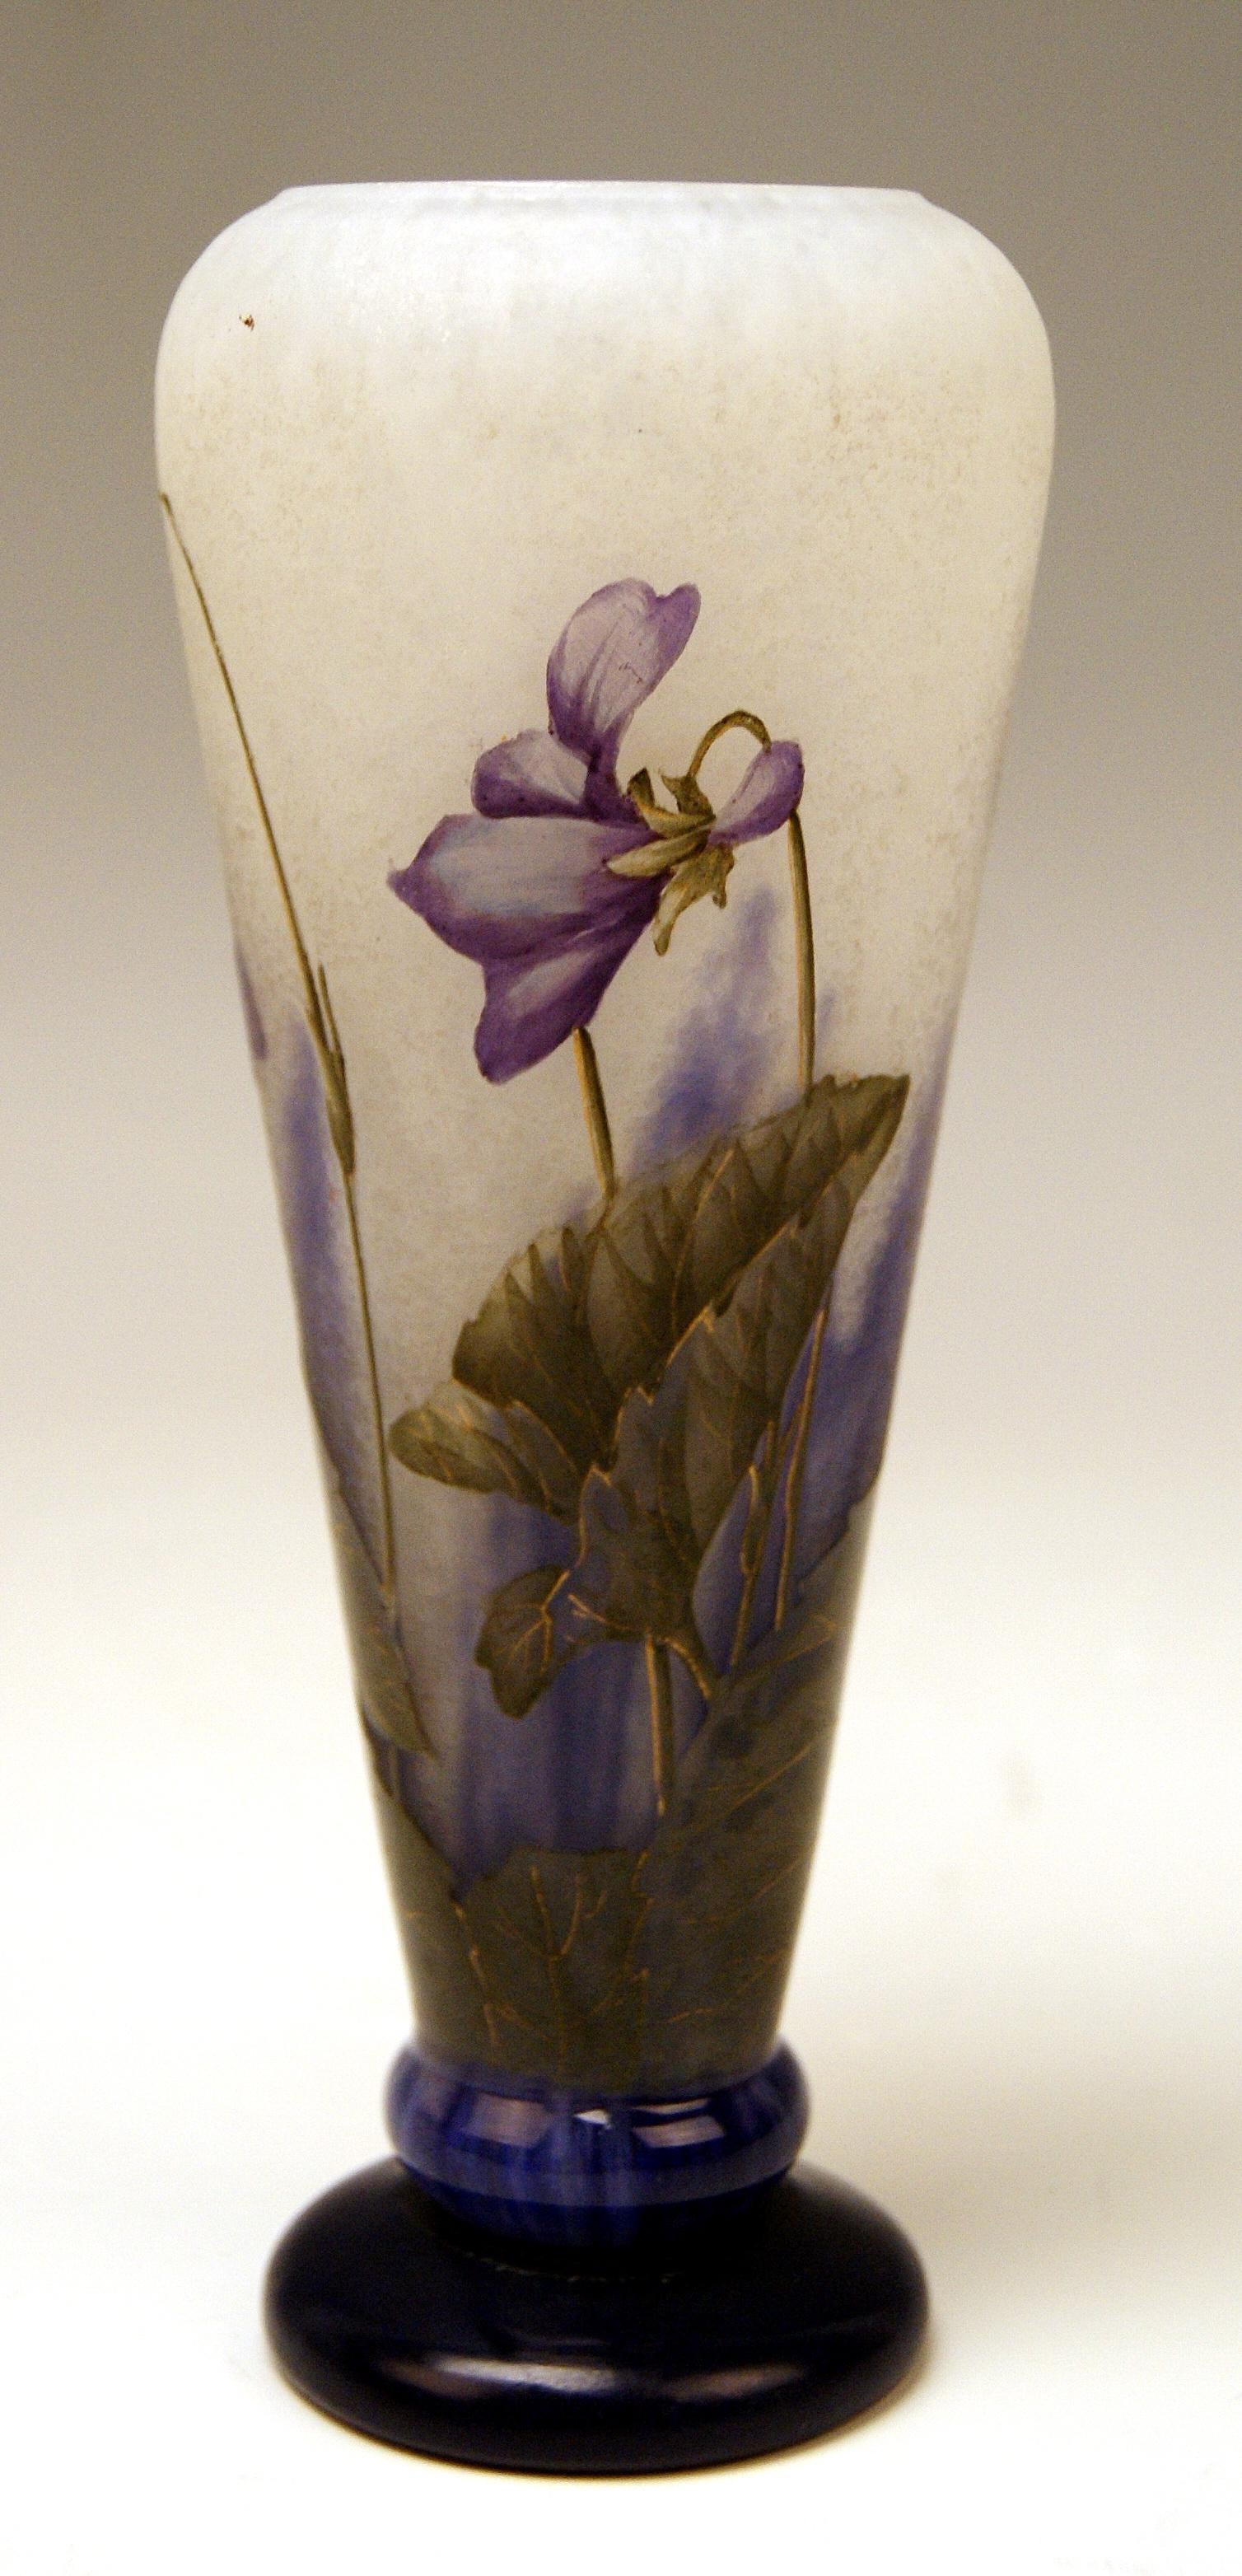 Daum Nancy Cameo finest as well as early art glass oblong tapering vase of Art Nouveau period.
Excellently decorated with interesting flowers: These are violets.

Manufactory: Daum Frères / made in France / Nancy, Lorraine, circa 1895.